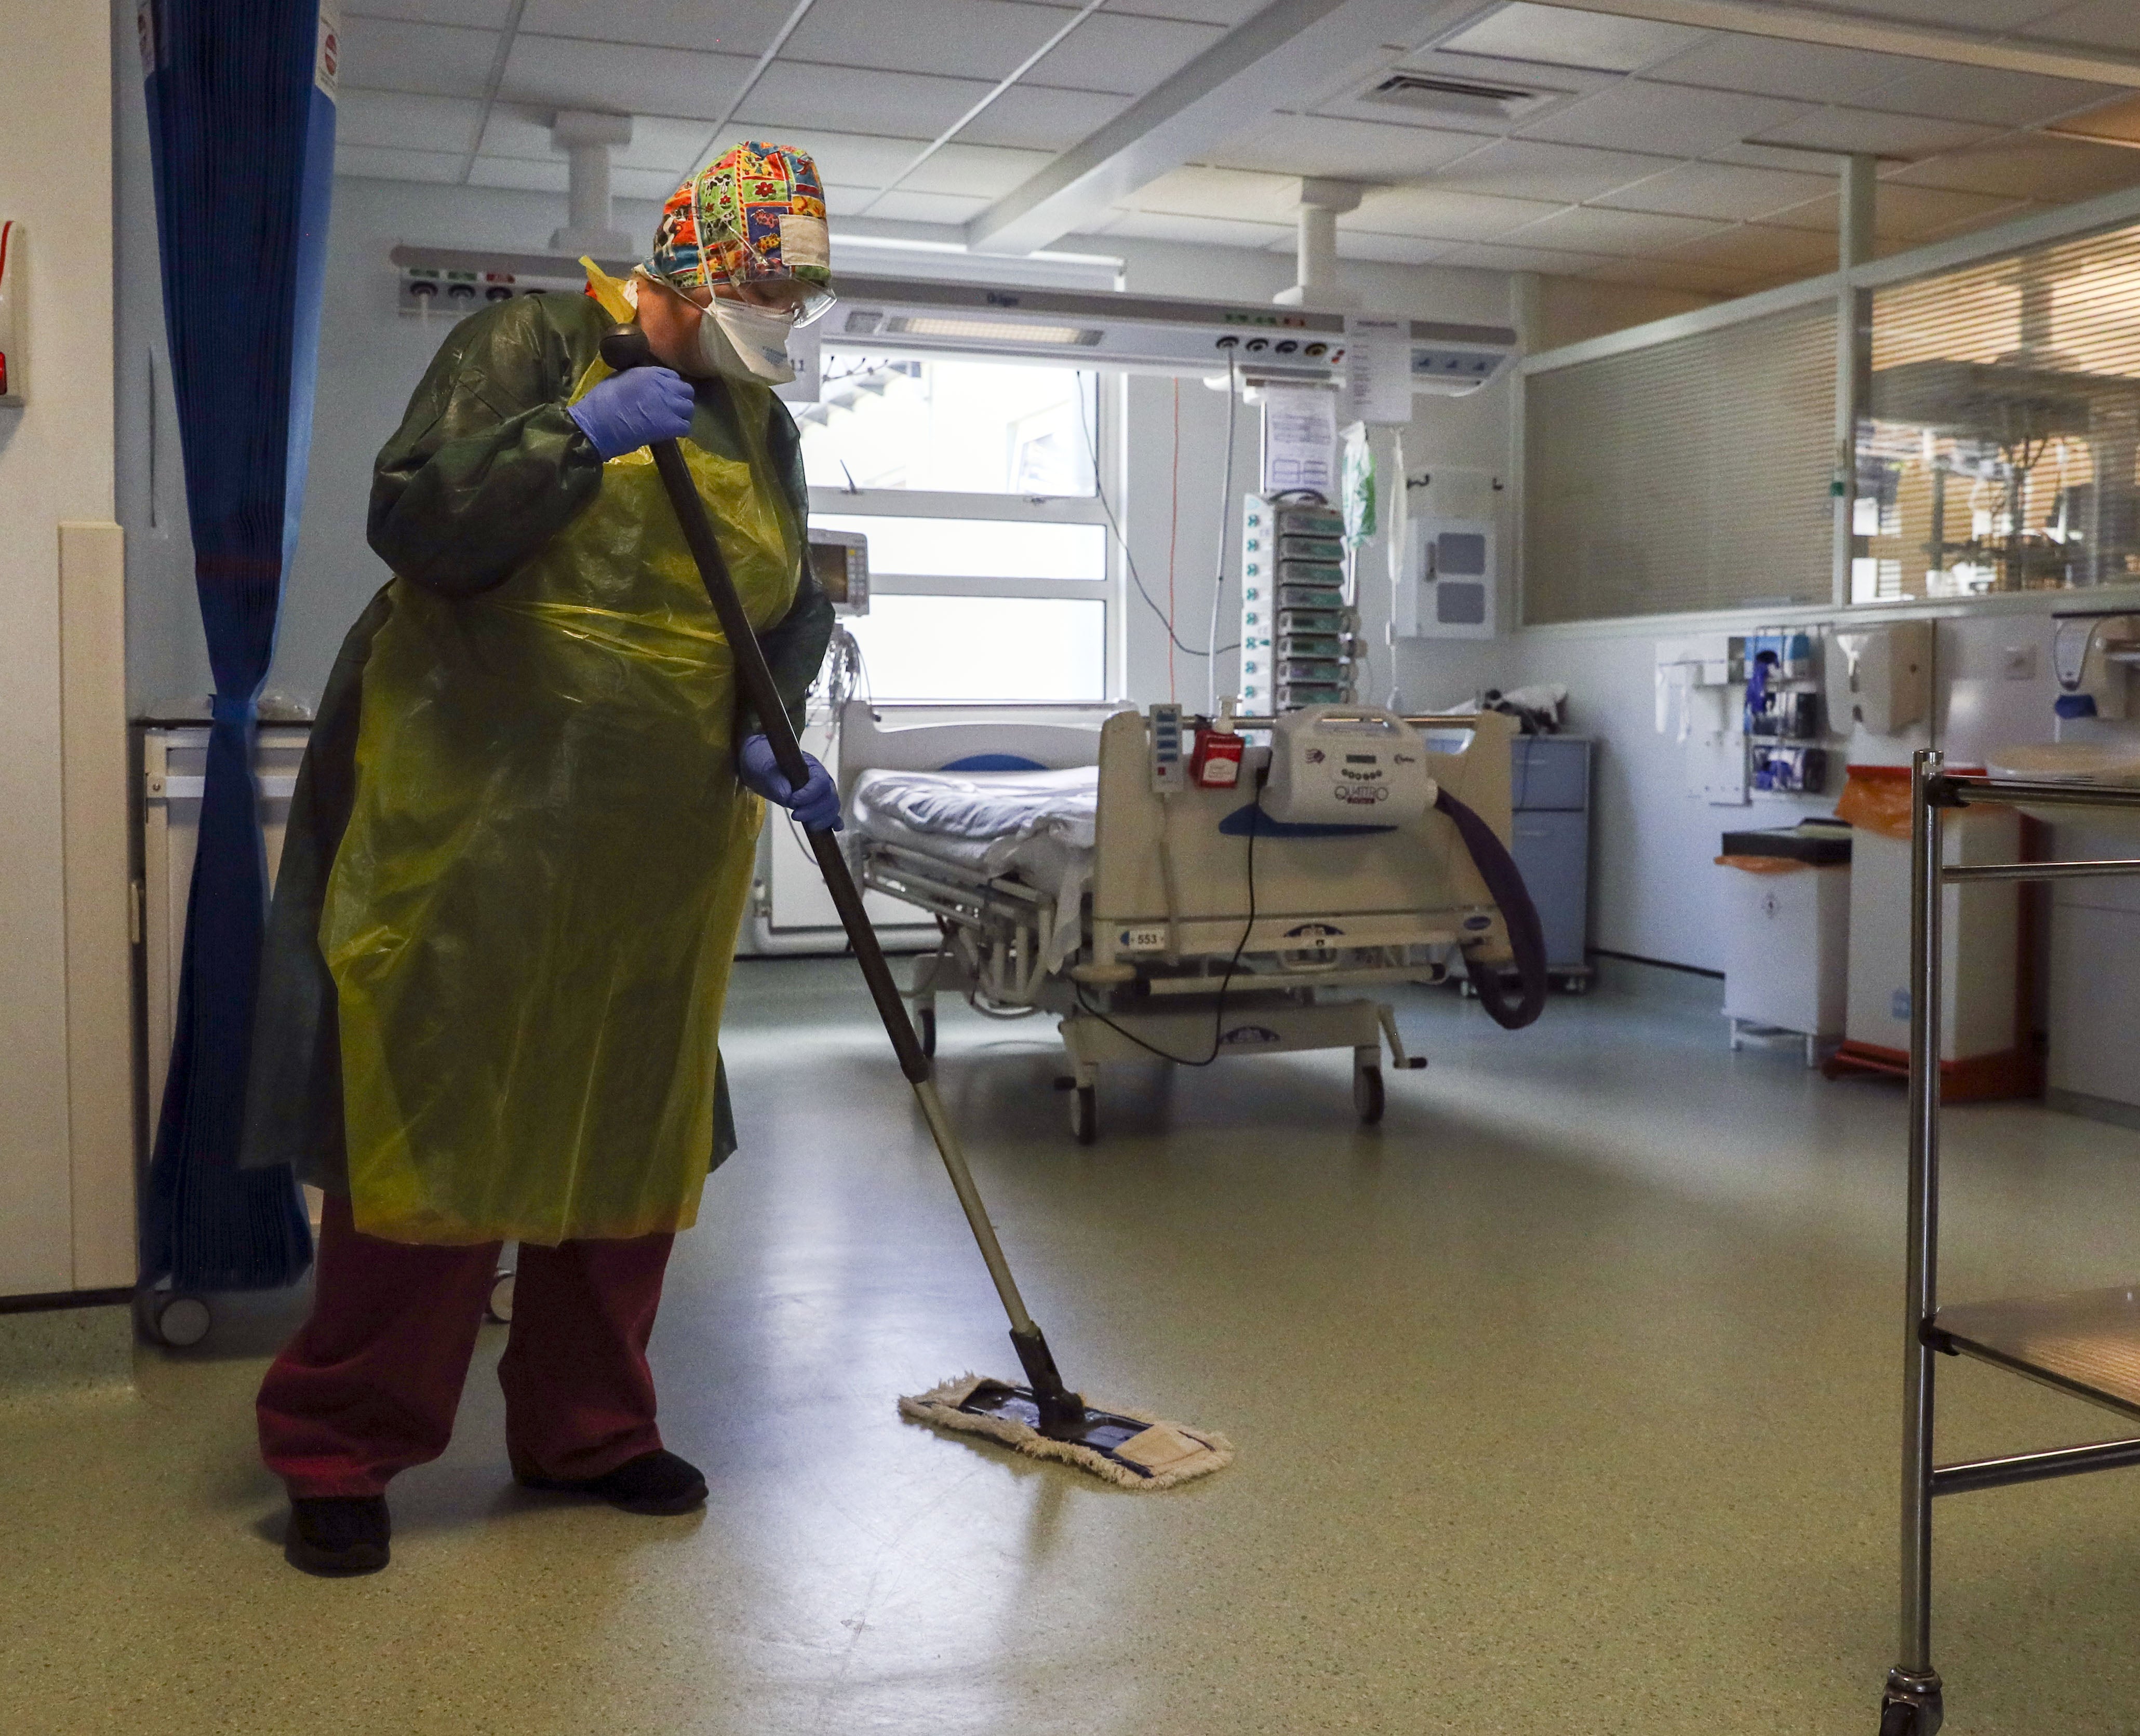 File photo dated 27/5/2020 of a cleaner working on a hospital ward (Steve Parsons/PA)